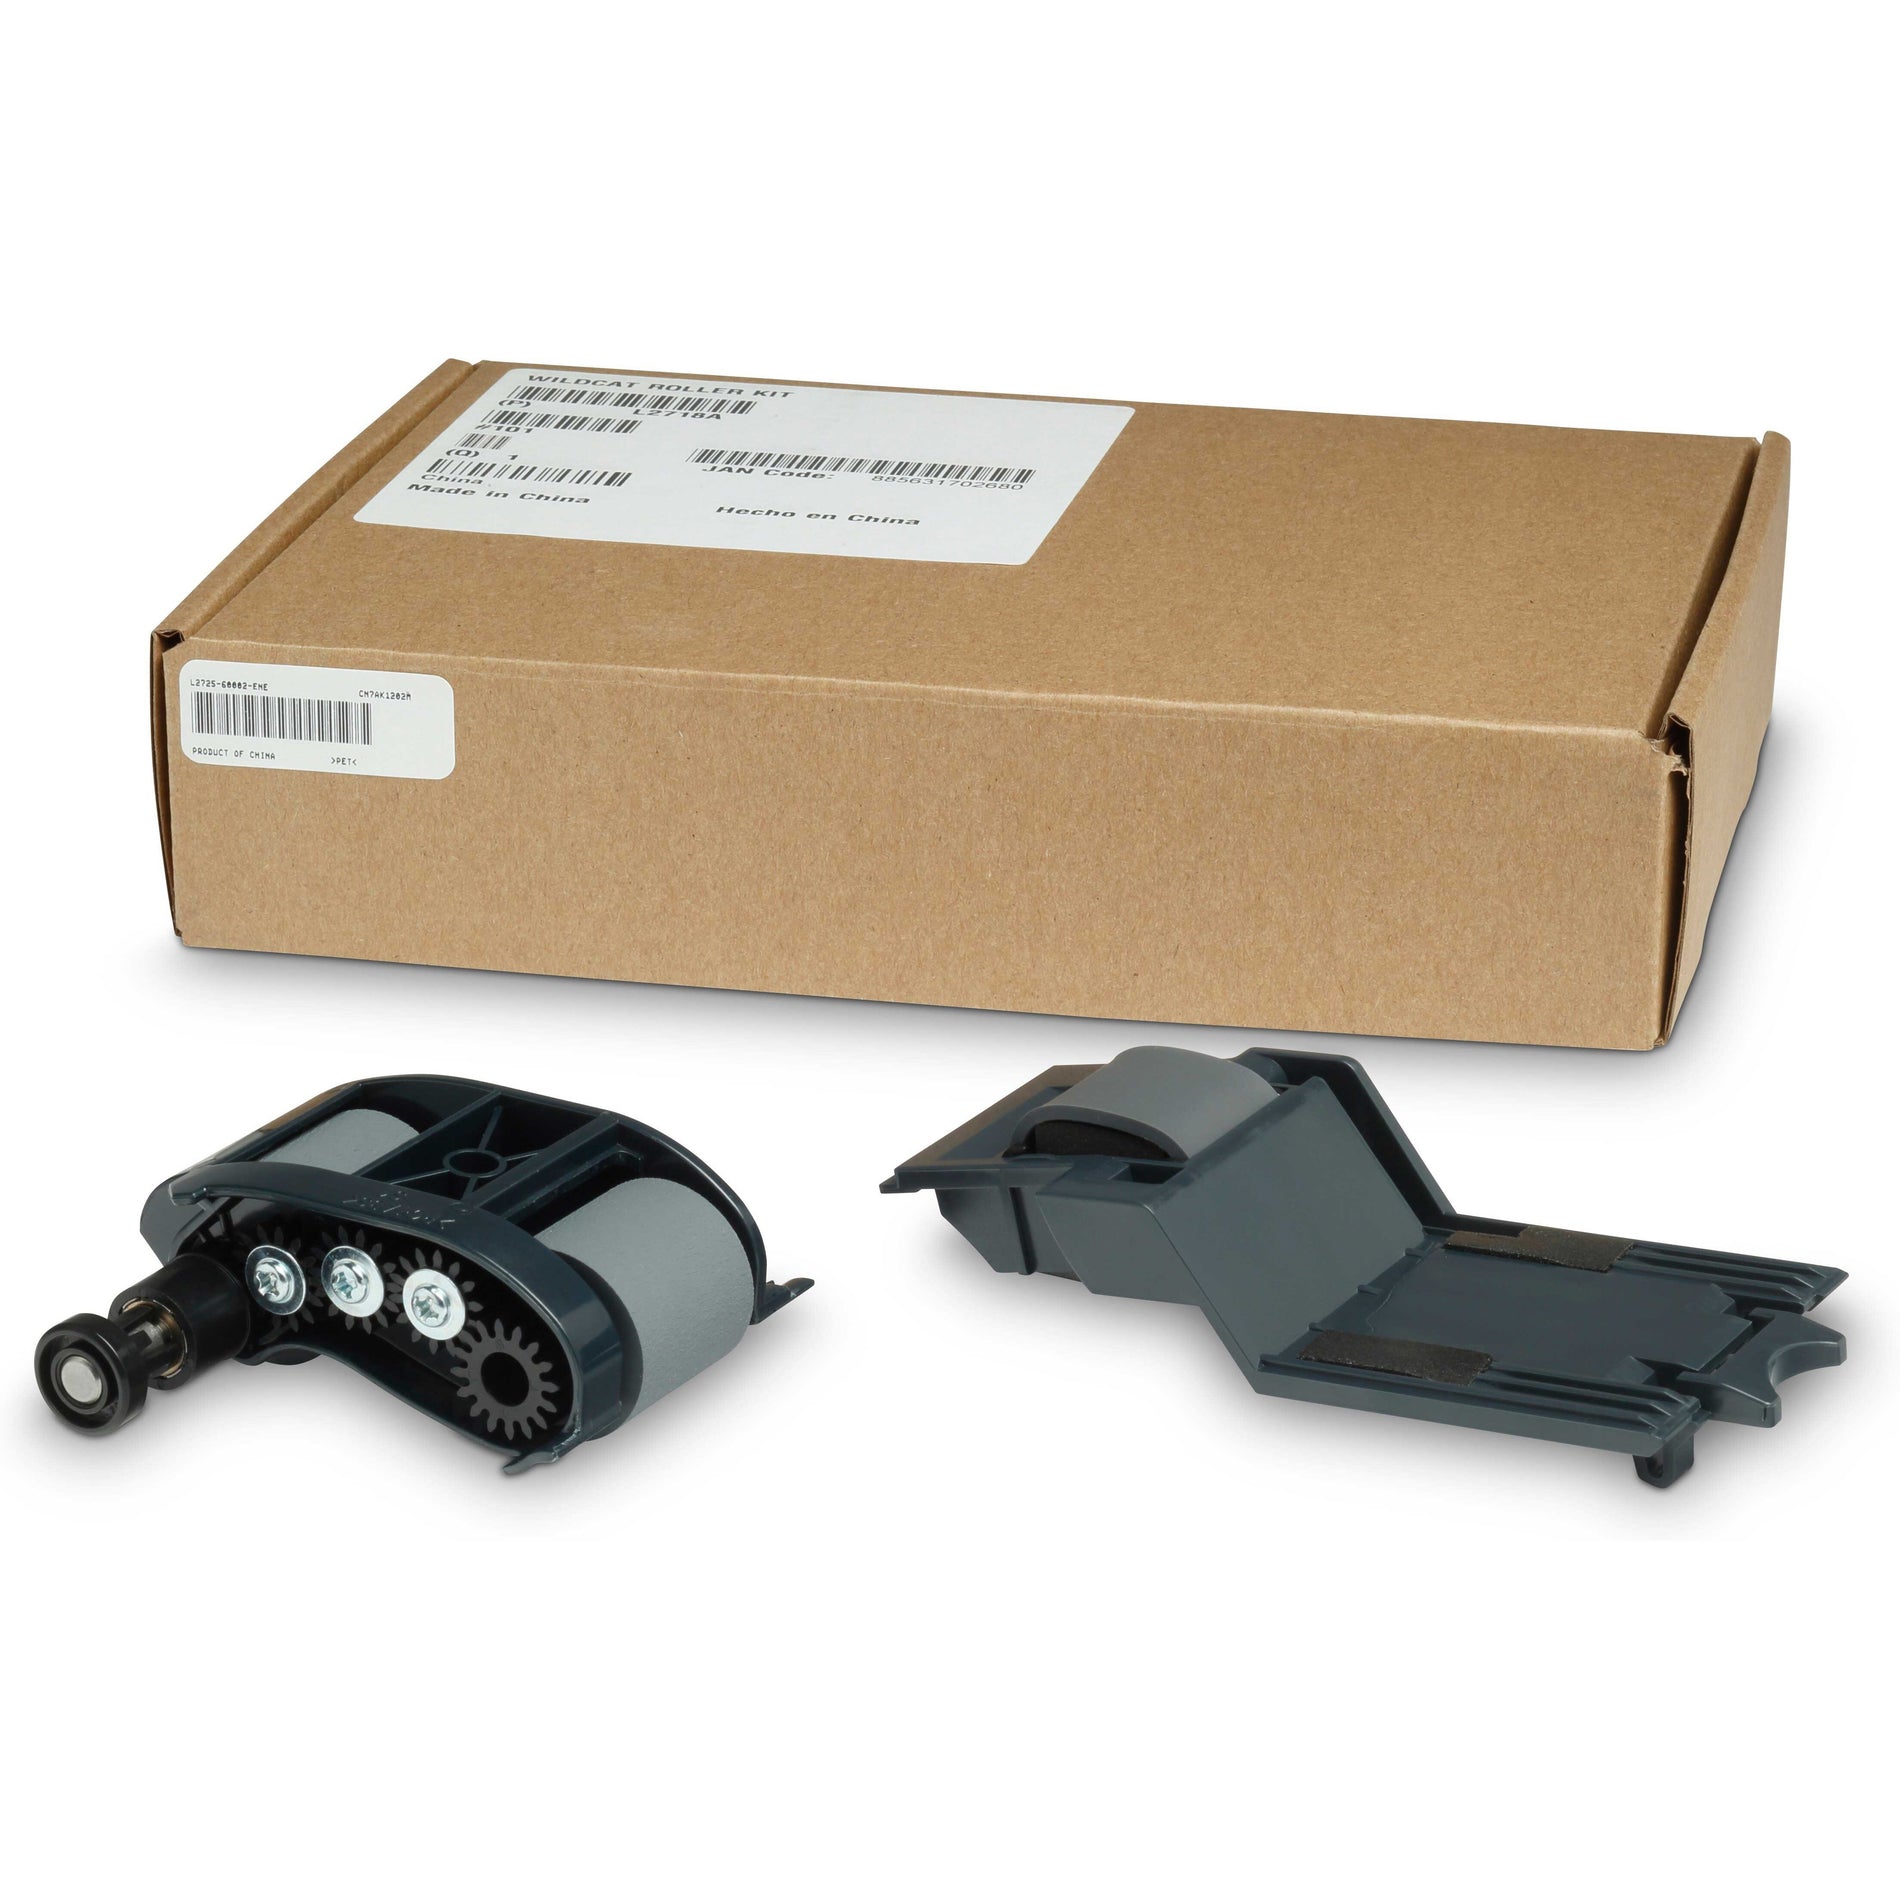 HP L2718A 100 ADF Roller Replacement Kit, Scanner Accessory